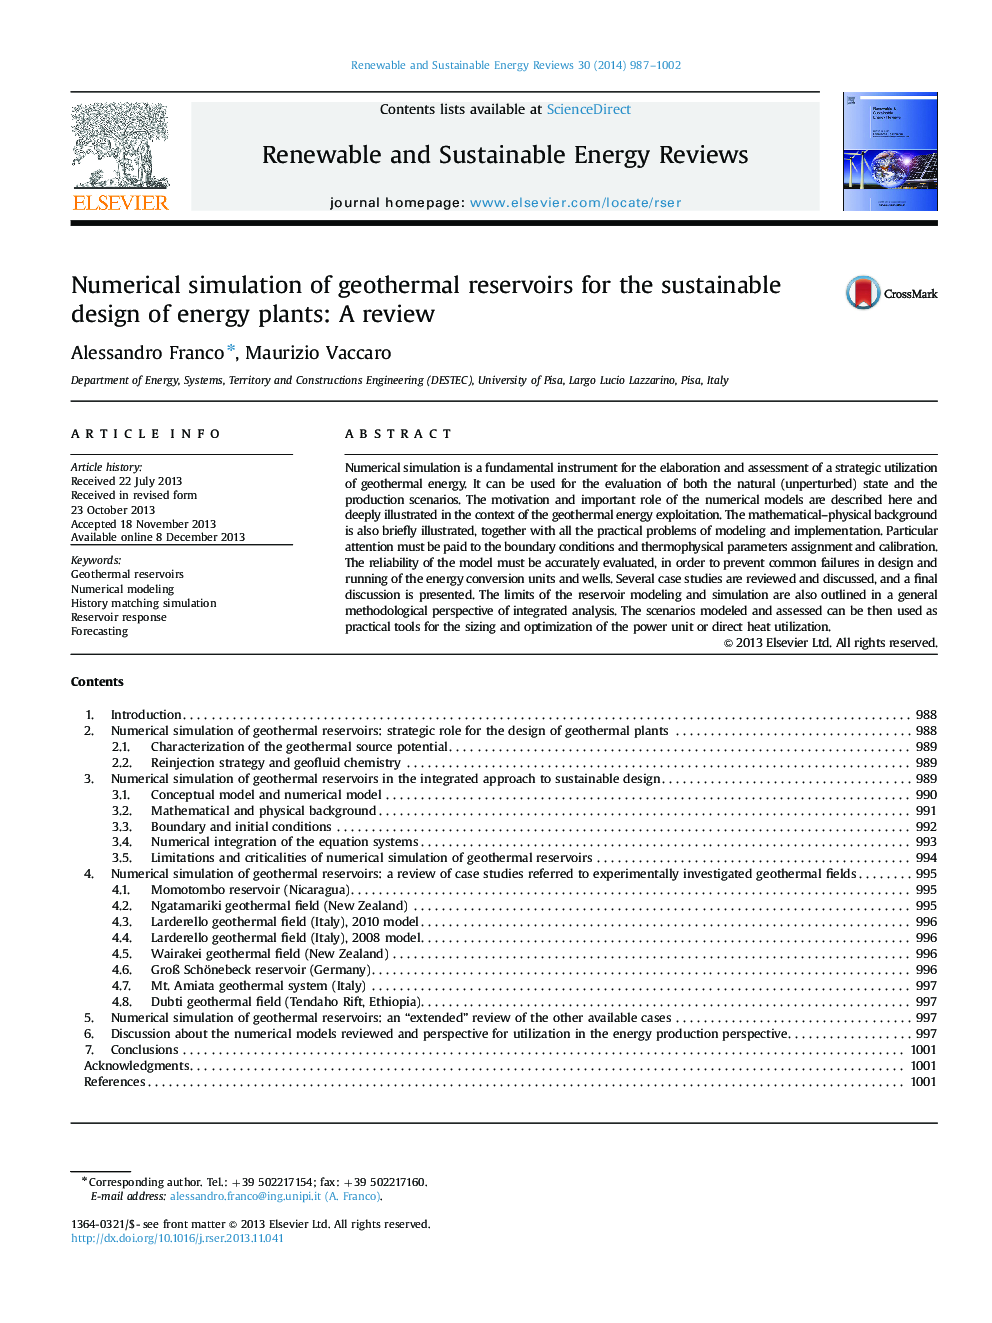 Numerical simulation of geothermal reservoirs for the sustainable design of energy plants: A review